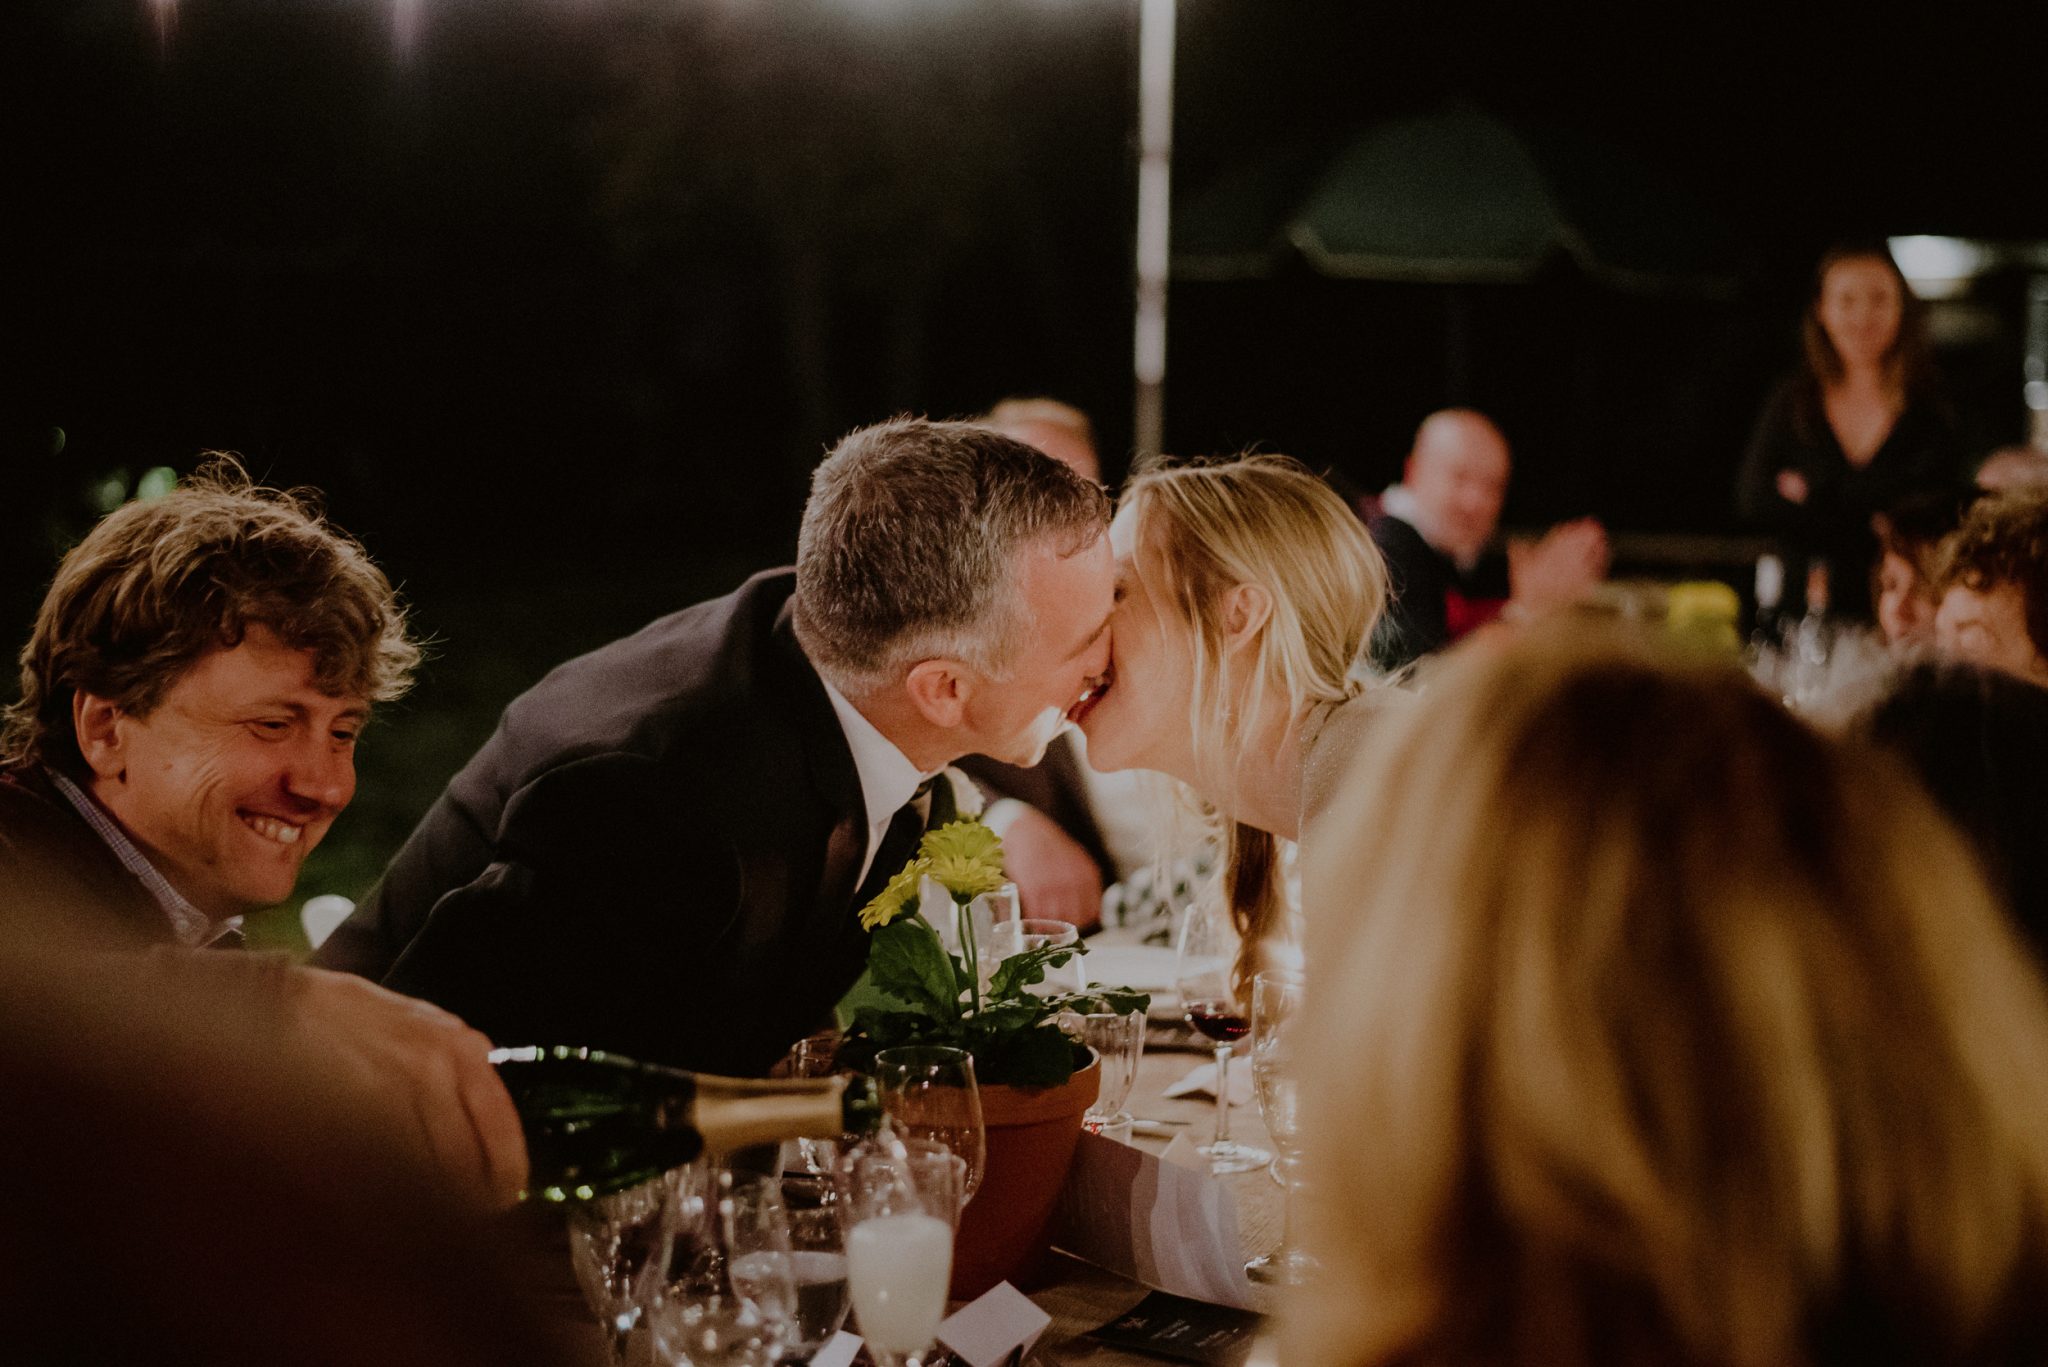 candid kiss between bride and groom during dinner